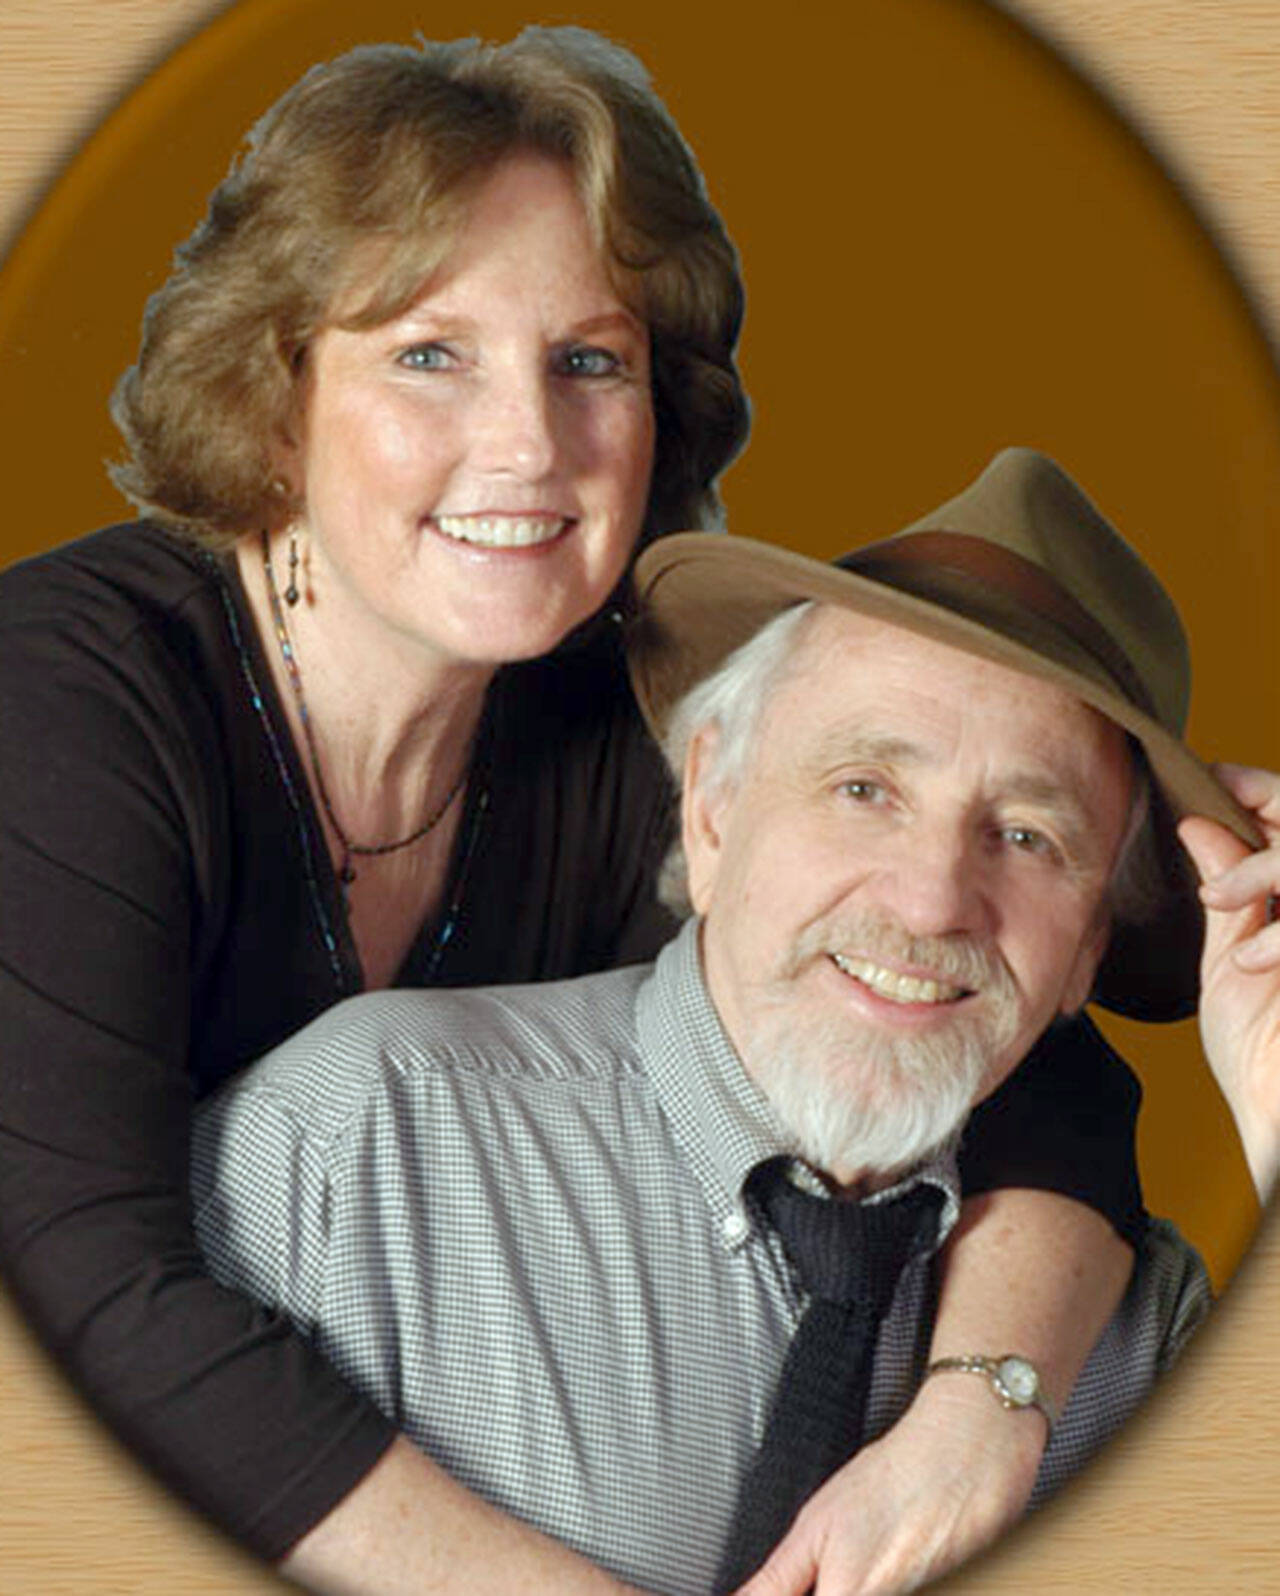 The Candlelight Concert this month will feature Mike and Val James.